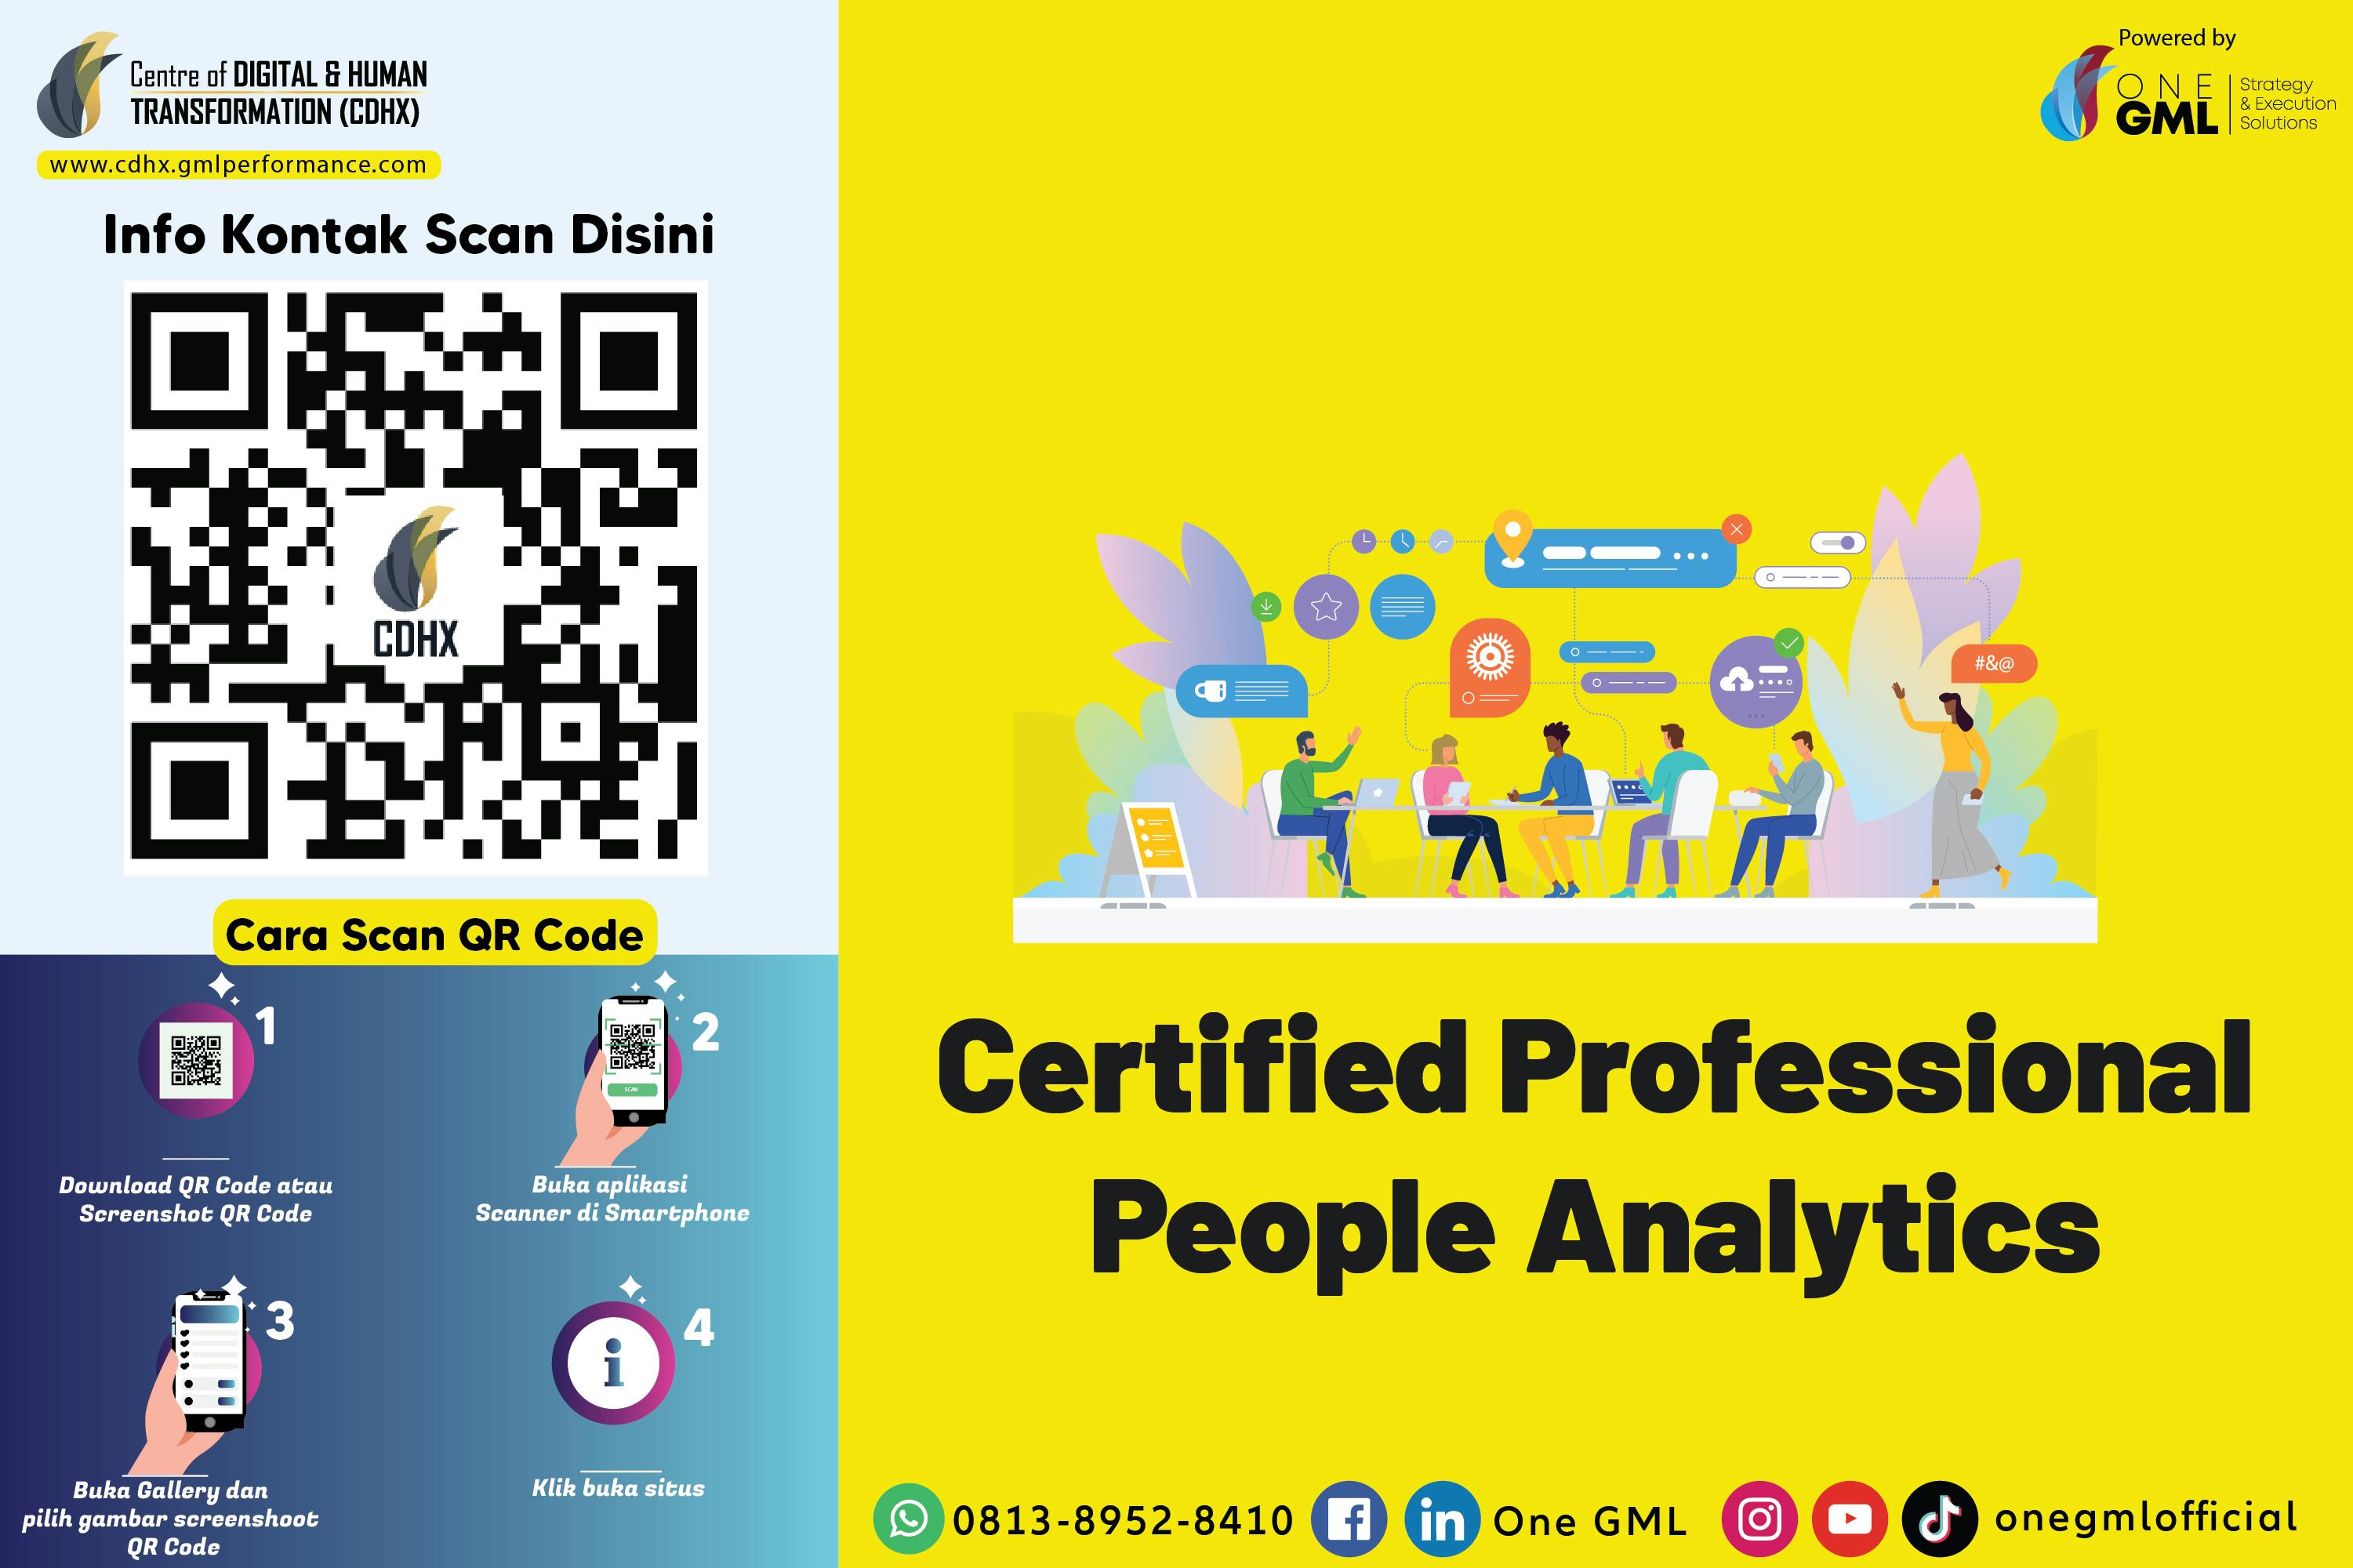 Certified Professional People Analytics